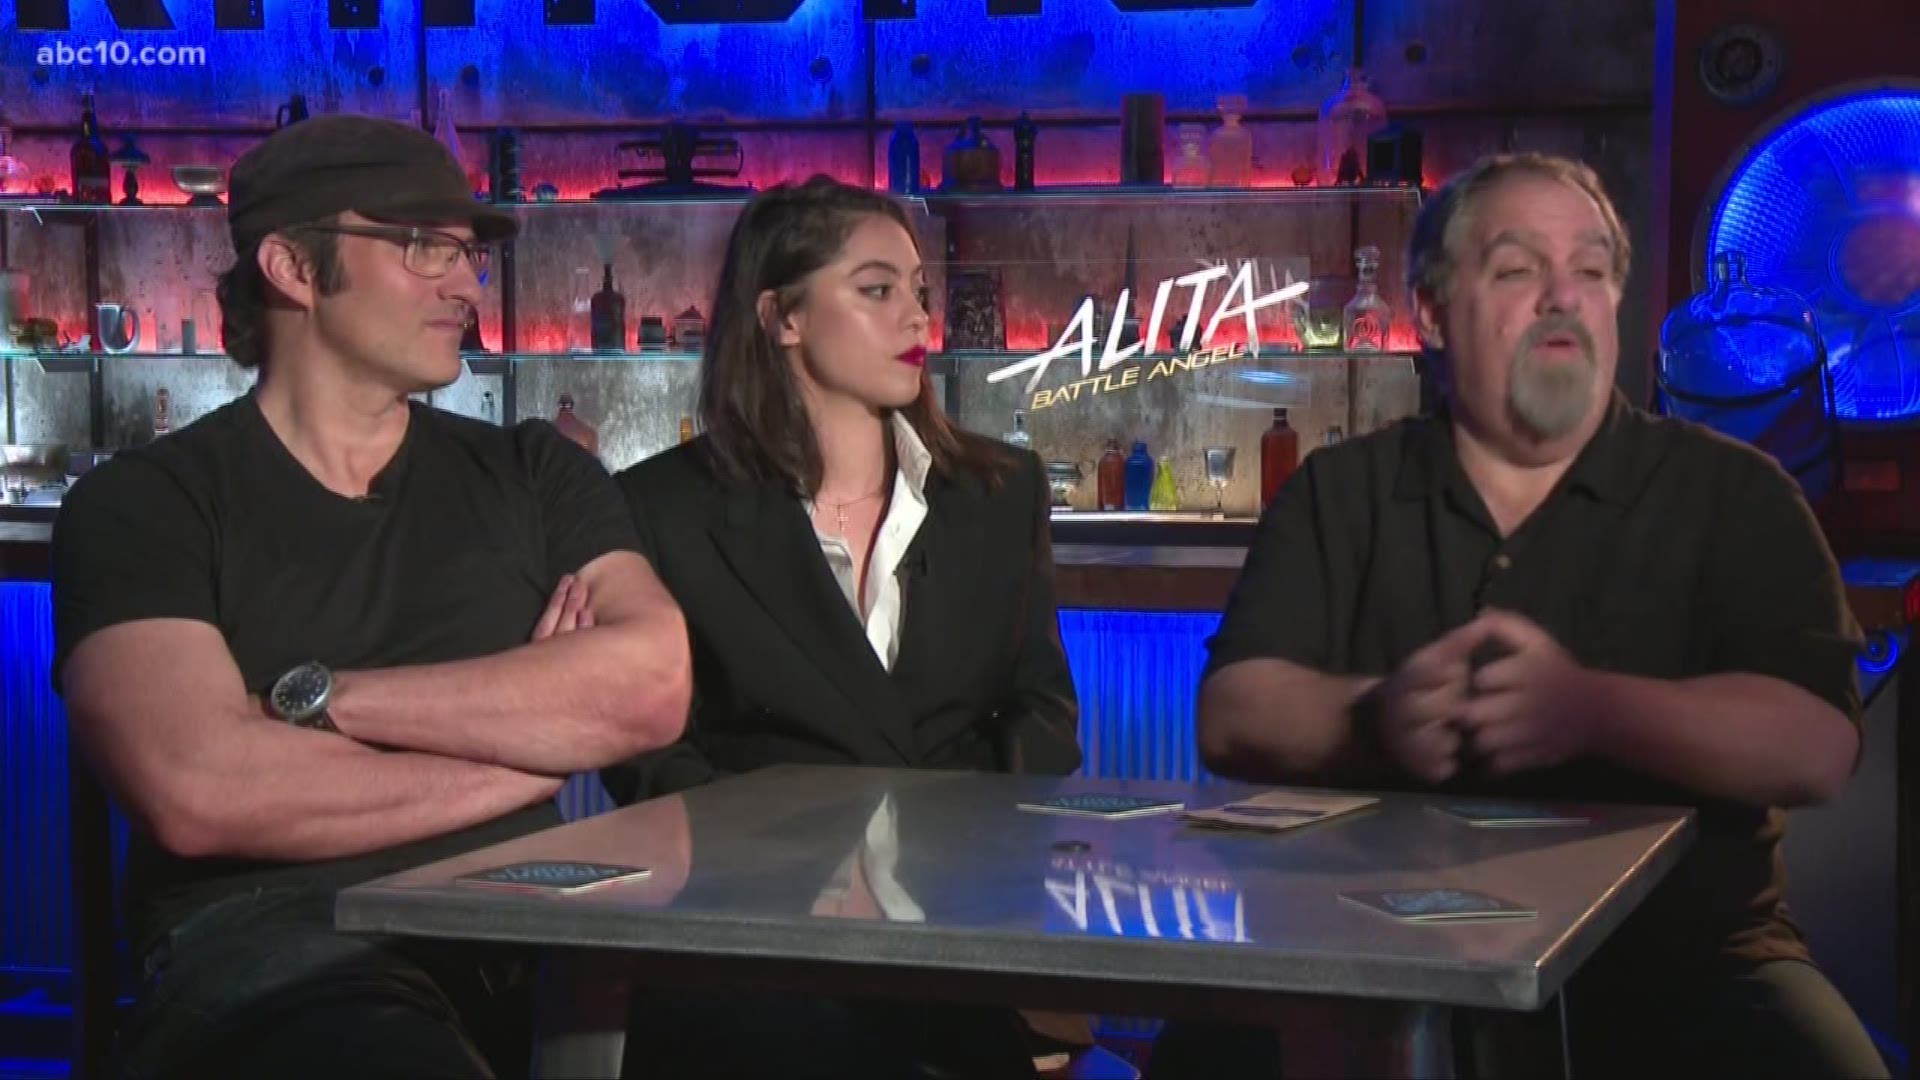 Mark S. Allen sat down with Rosa Salazar, the star of the new movie "Alita: Battle Angel" as well as the film's producers Robert Rodriguez and Jon Landau.